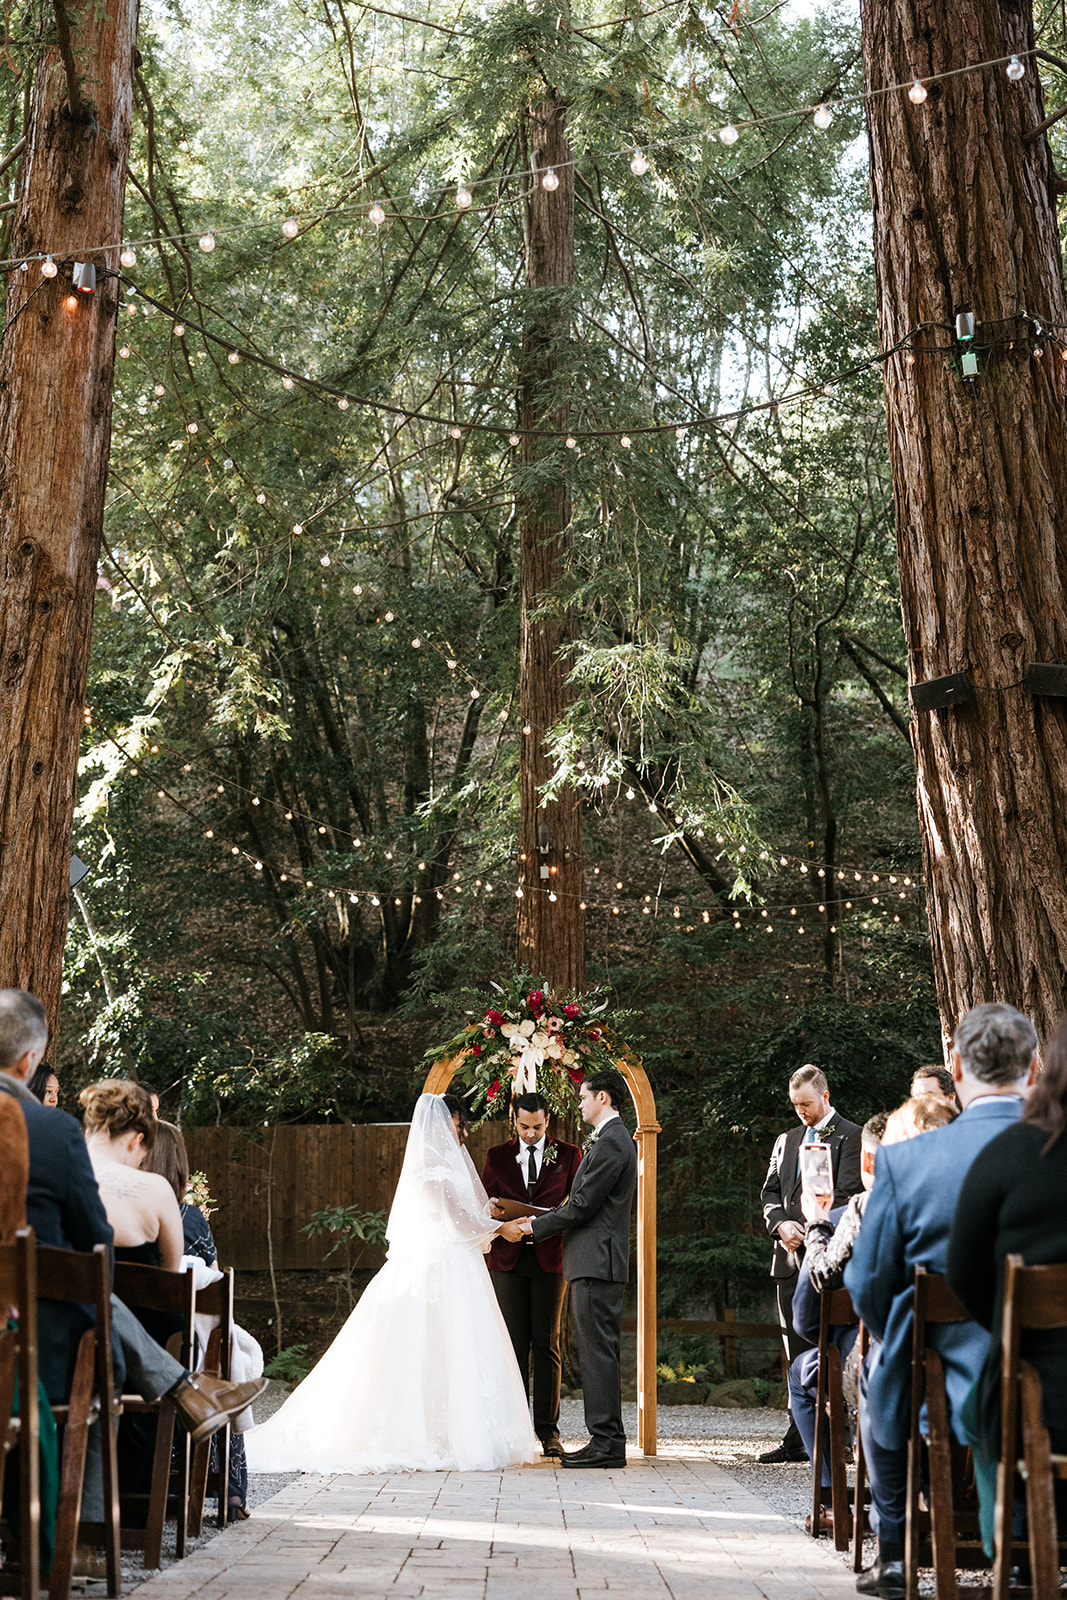 Bride and Groom married under the Redwoods